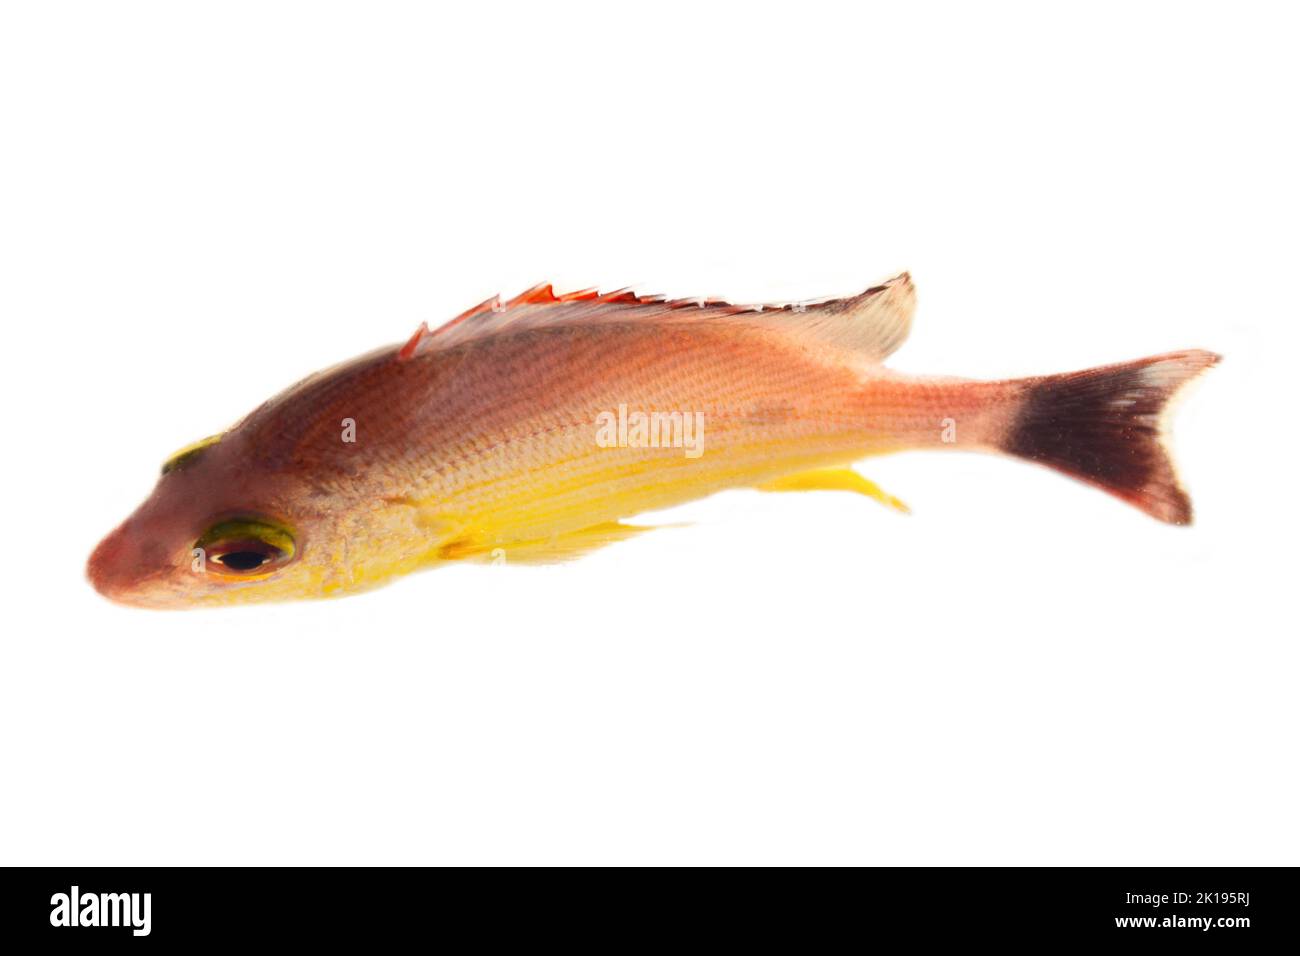 Yellow predatory fish with orange stripes and fins (like cichlid) from Sri Lanka, goldfish isolated on a white background Stock Photo